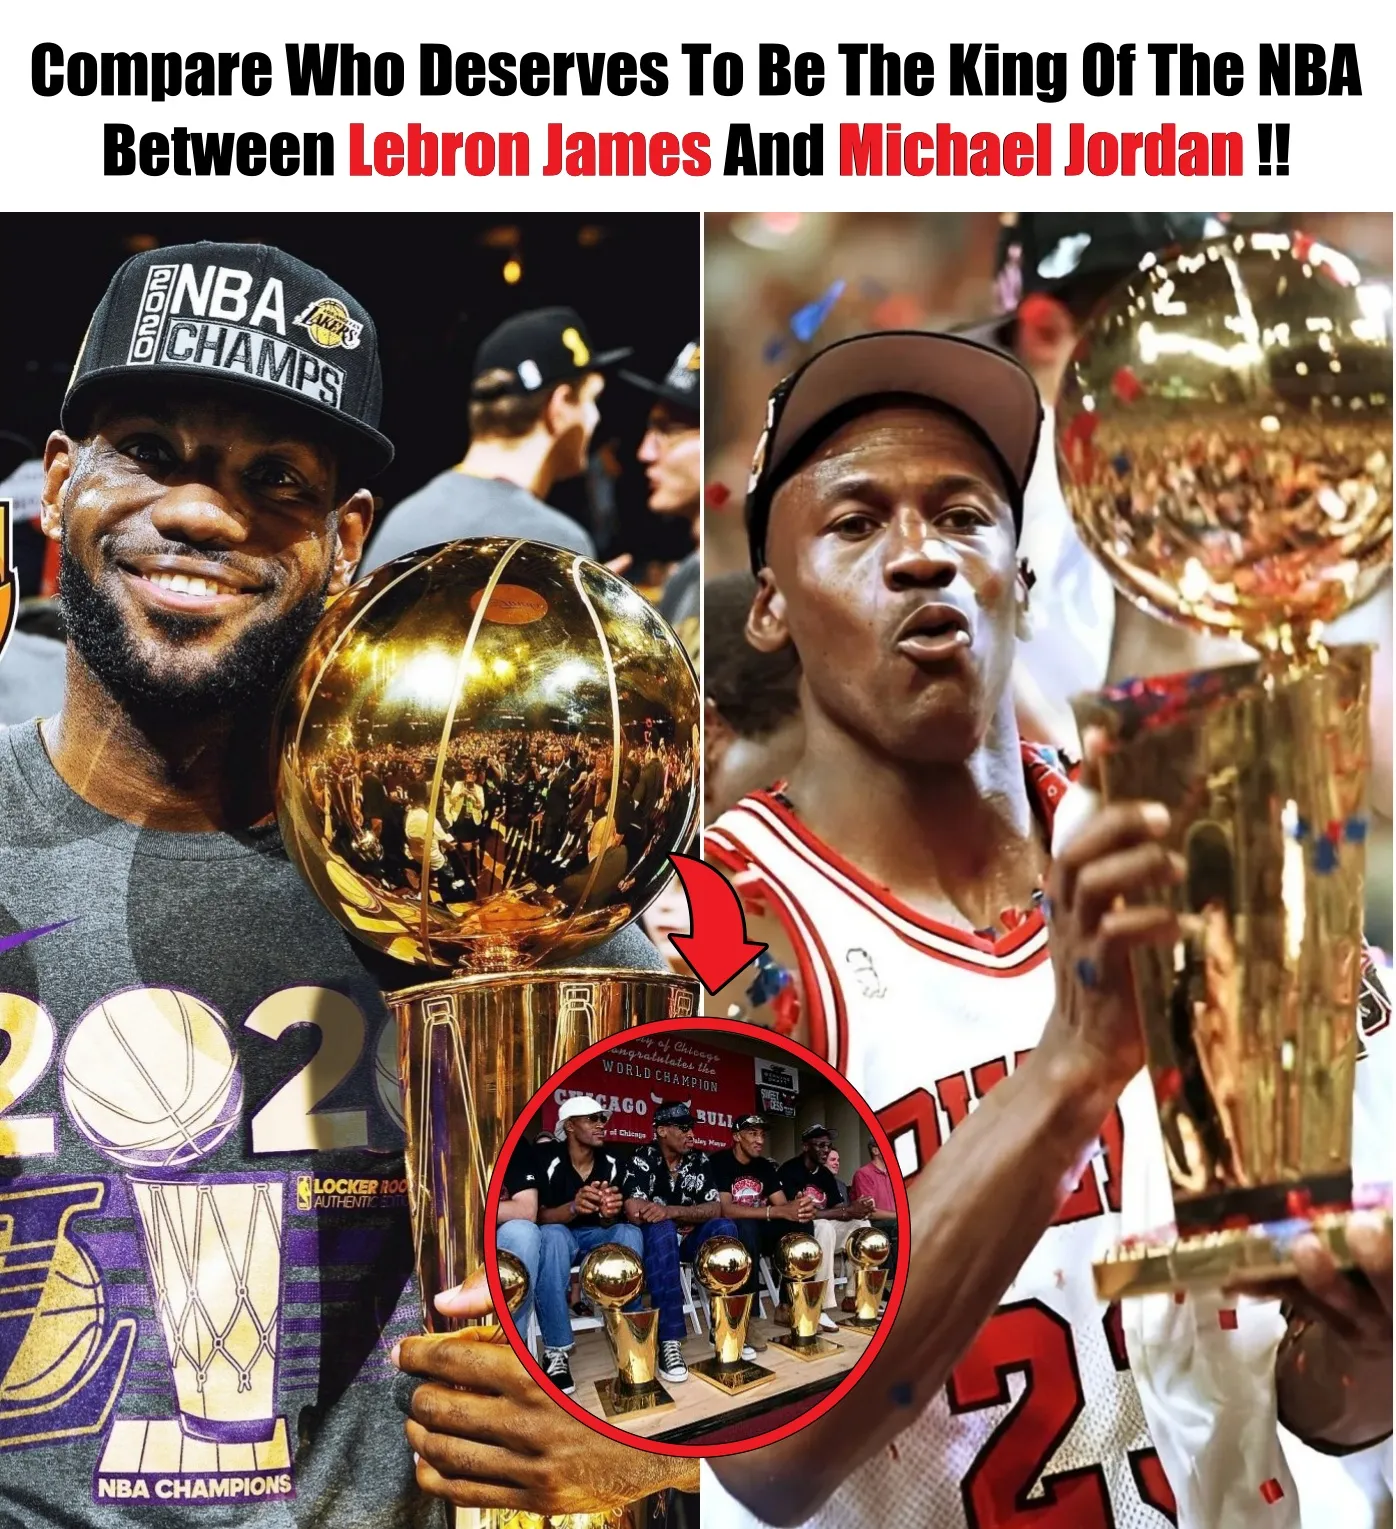 Cover Image for Compare Who Deserves To Be The King Of The NBA Lebron James And Michael Jordan!!